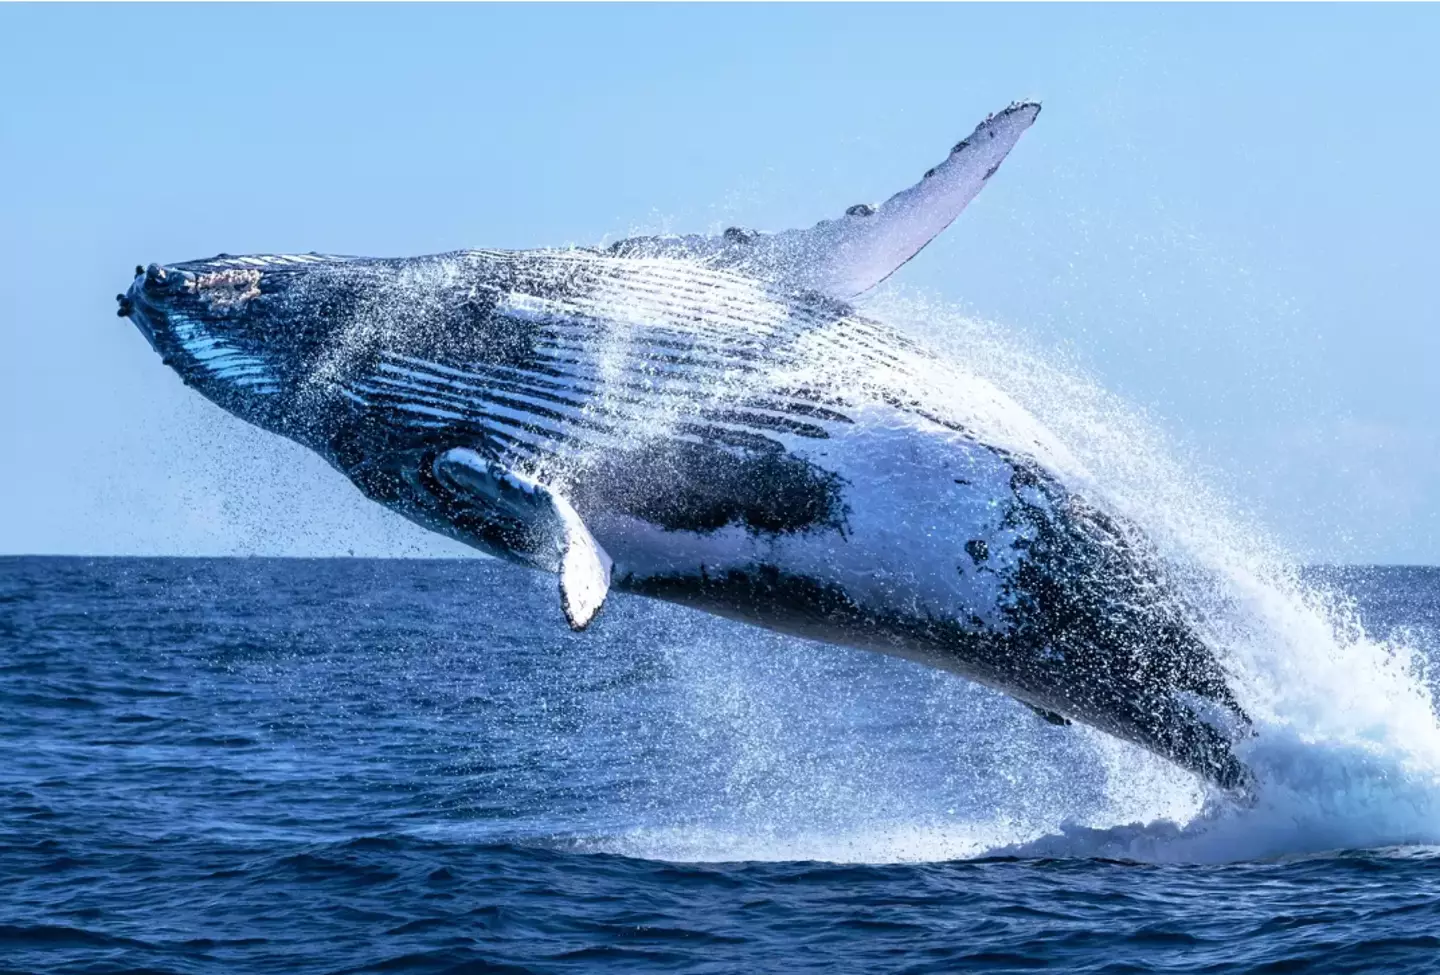 The humpback whale is one of the biggest sea creatures out there.